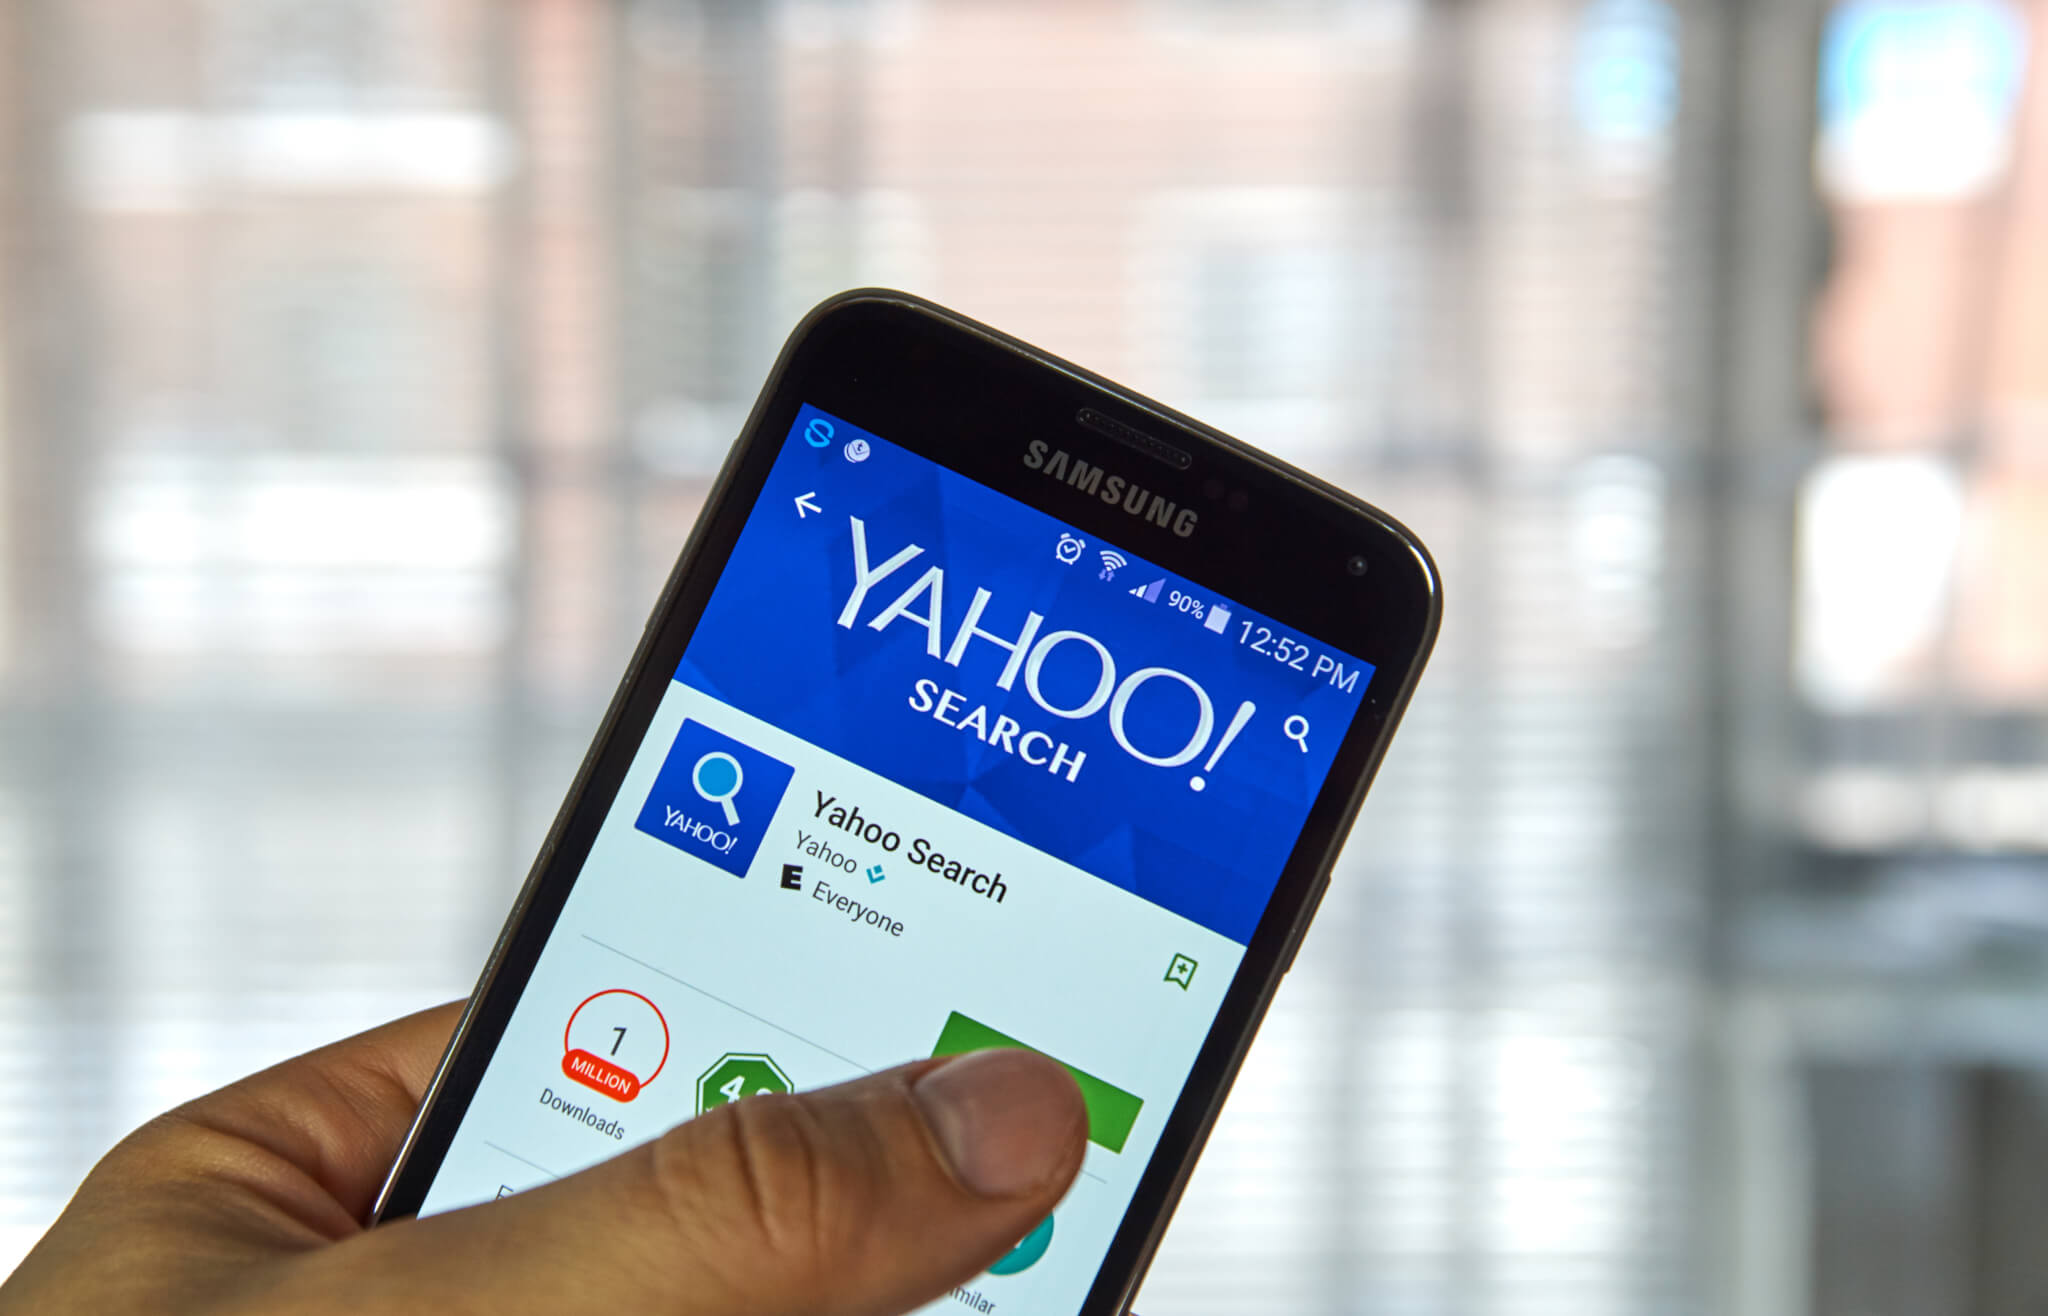 Yahoo shows up on a mobile Samsung device